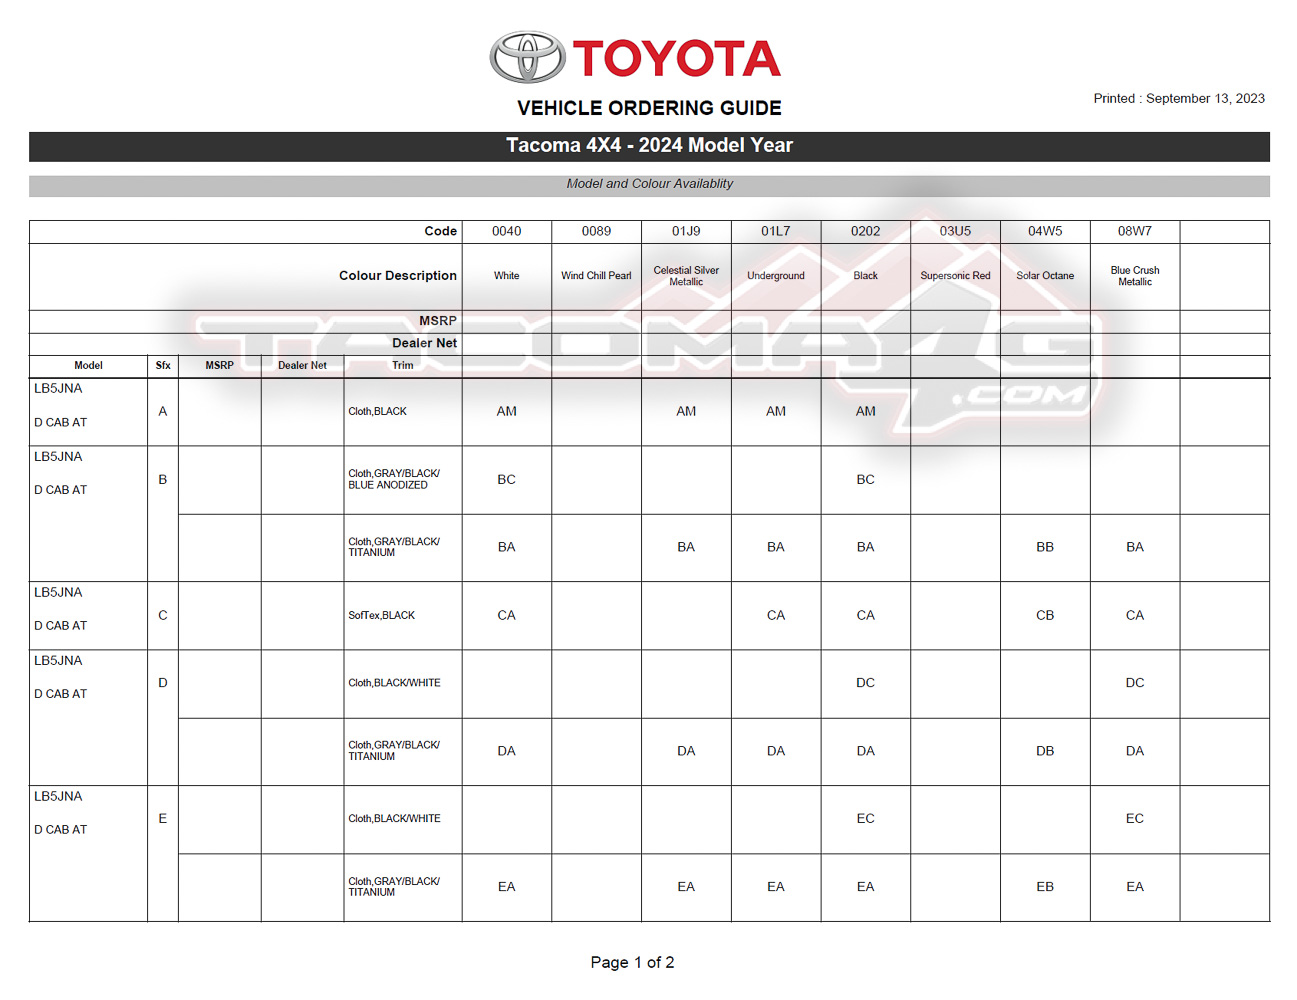 2024 Tacoma 2024 Tacoma Ordering Guide for Canada [Updated w/ Tacoma HYBRID i-Force MAX Models & Specs - Trailhunter, TRD Pro, Off-Road Premium, Limited] 2024-tacoma-order-guide-canada-9